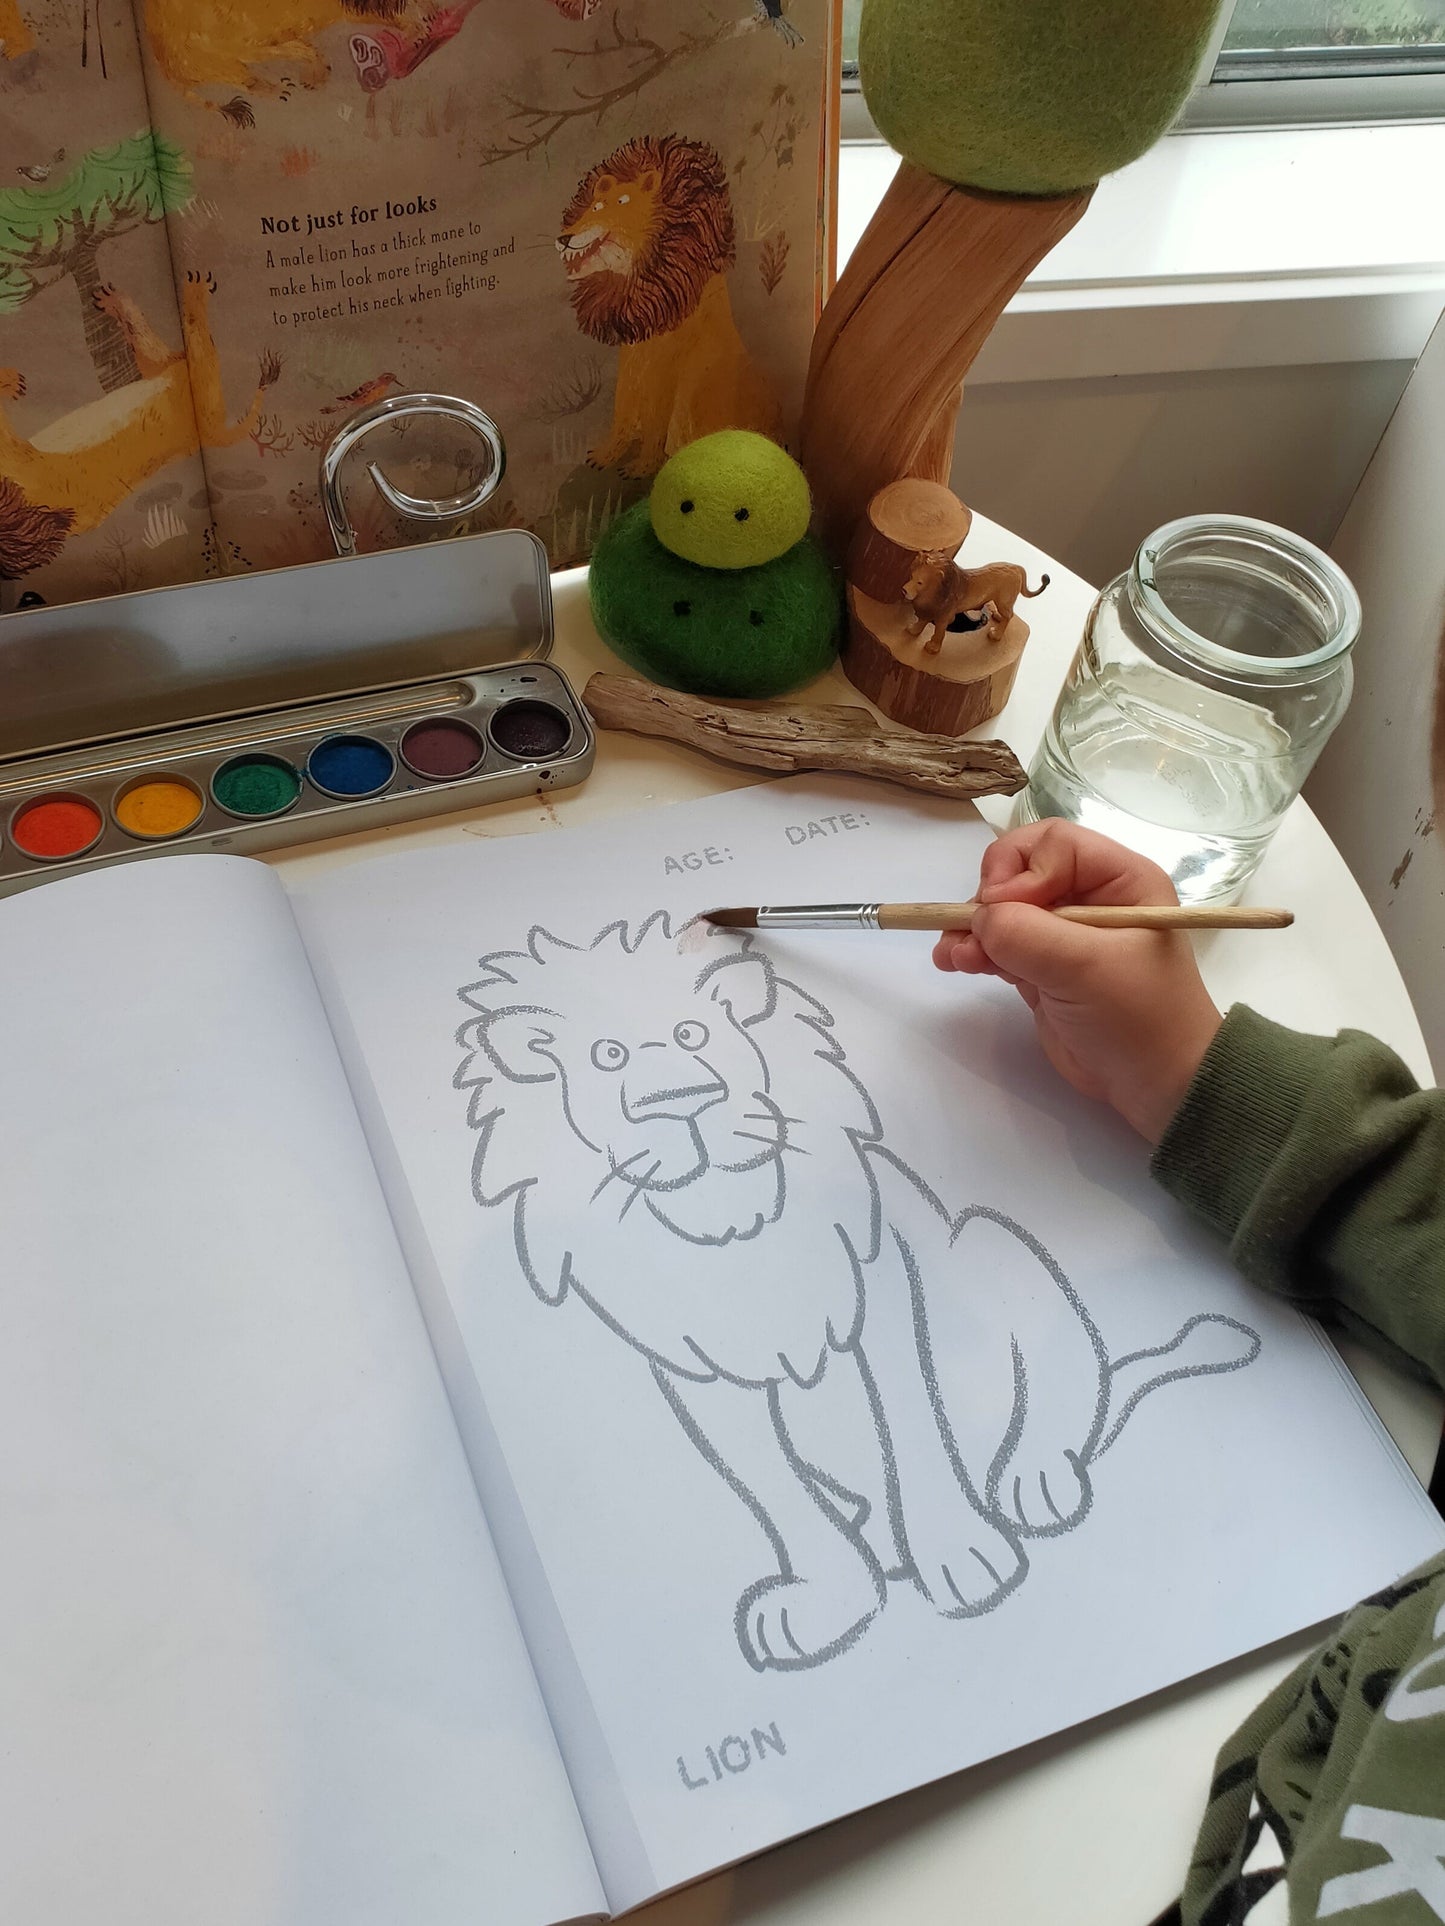 Toddlers First Colouring Book - An Endangered Animals Adventure by Honeysticks USA